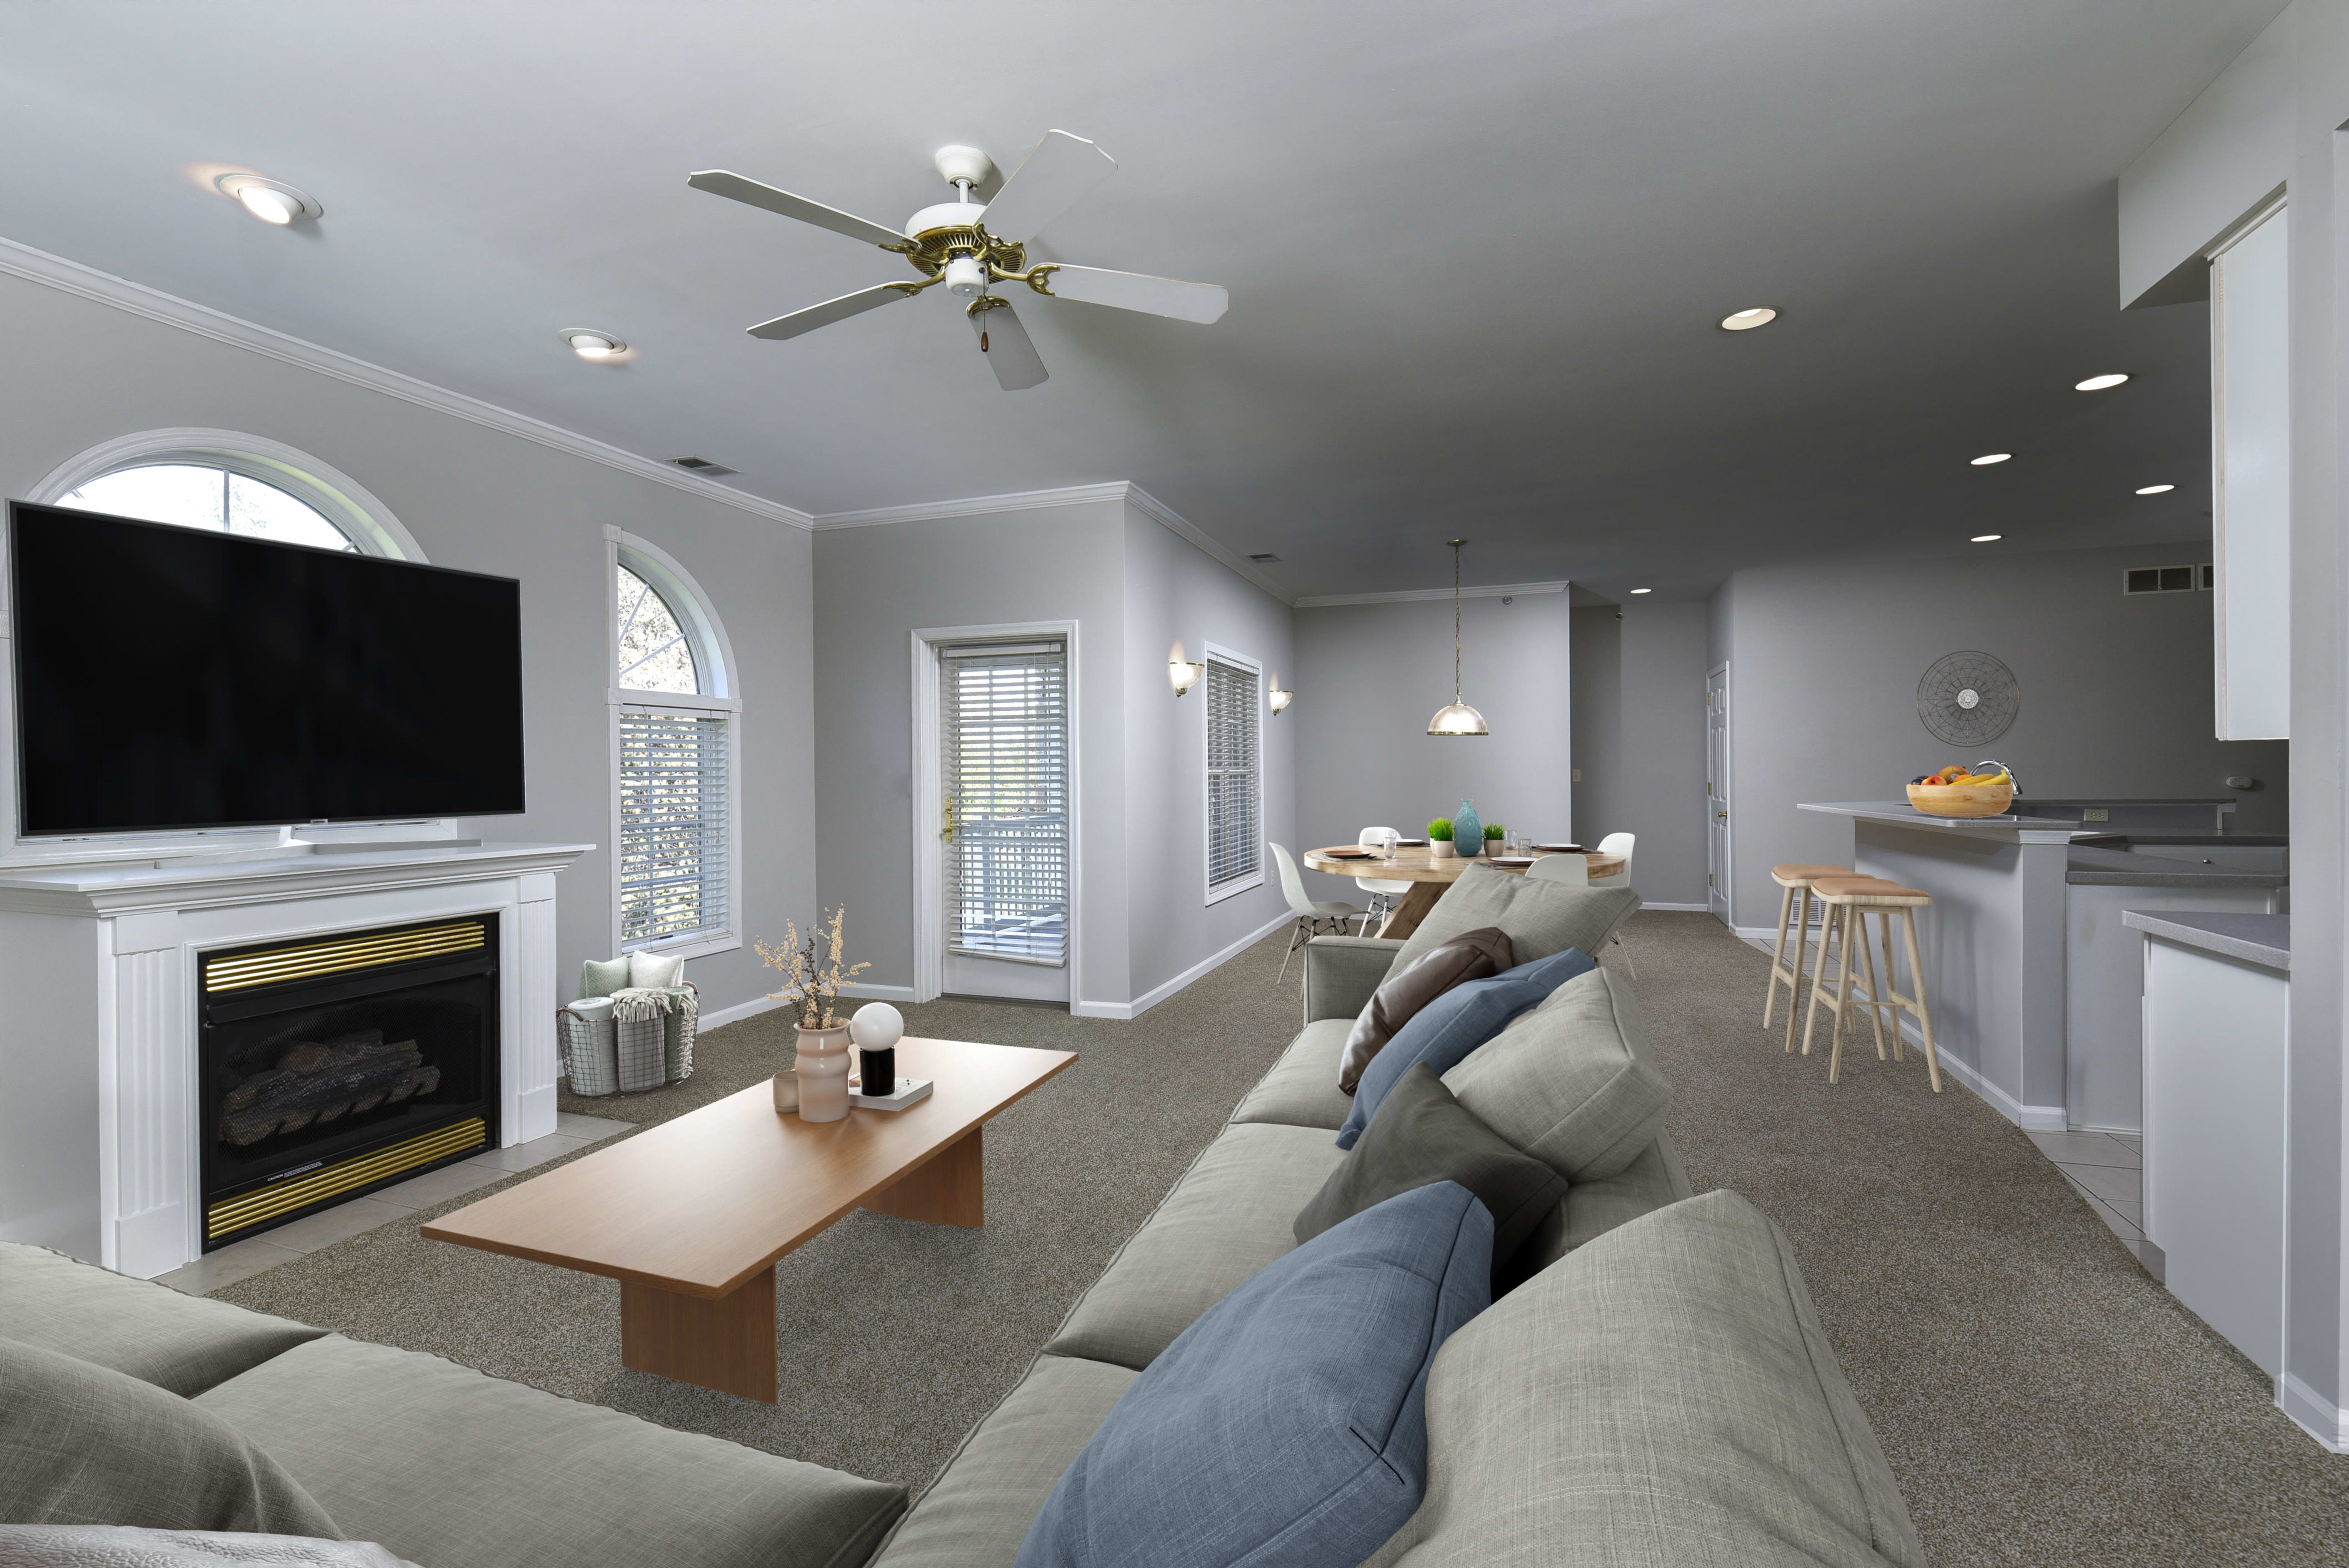 Living room in Springhouse Townhomes in Allentown, Pennsylvania